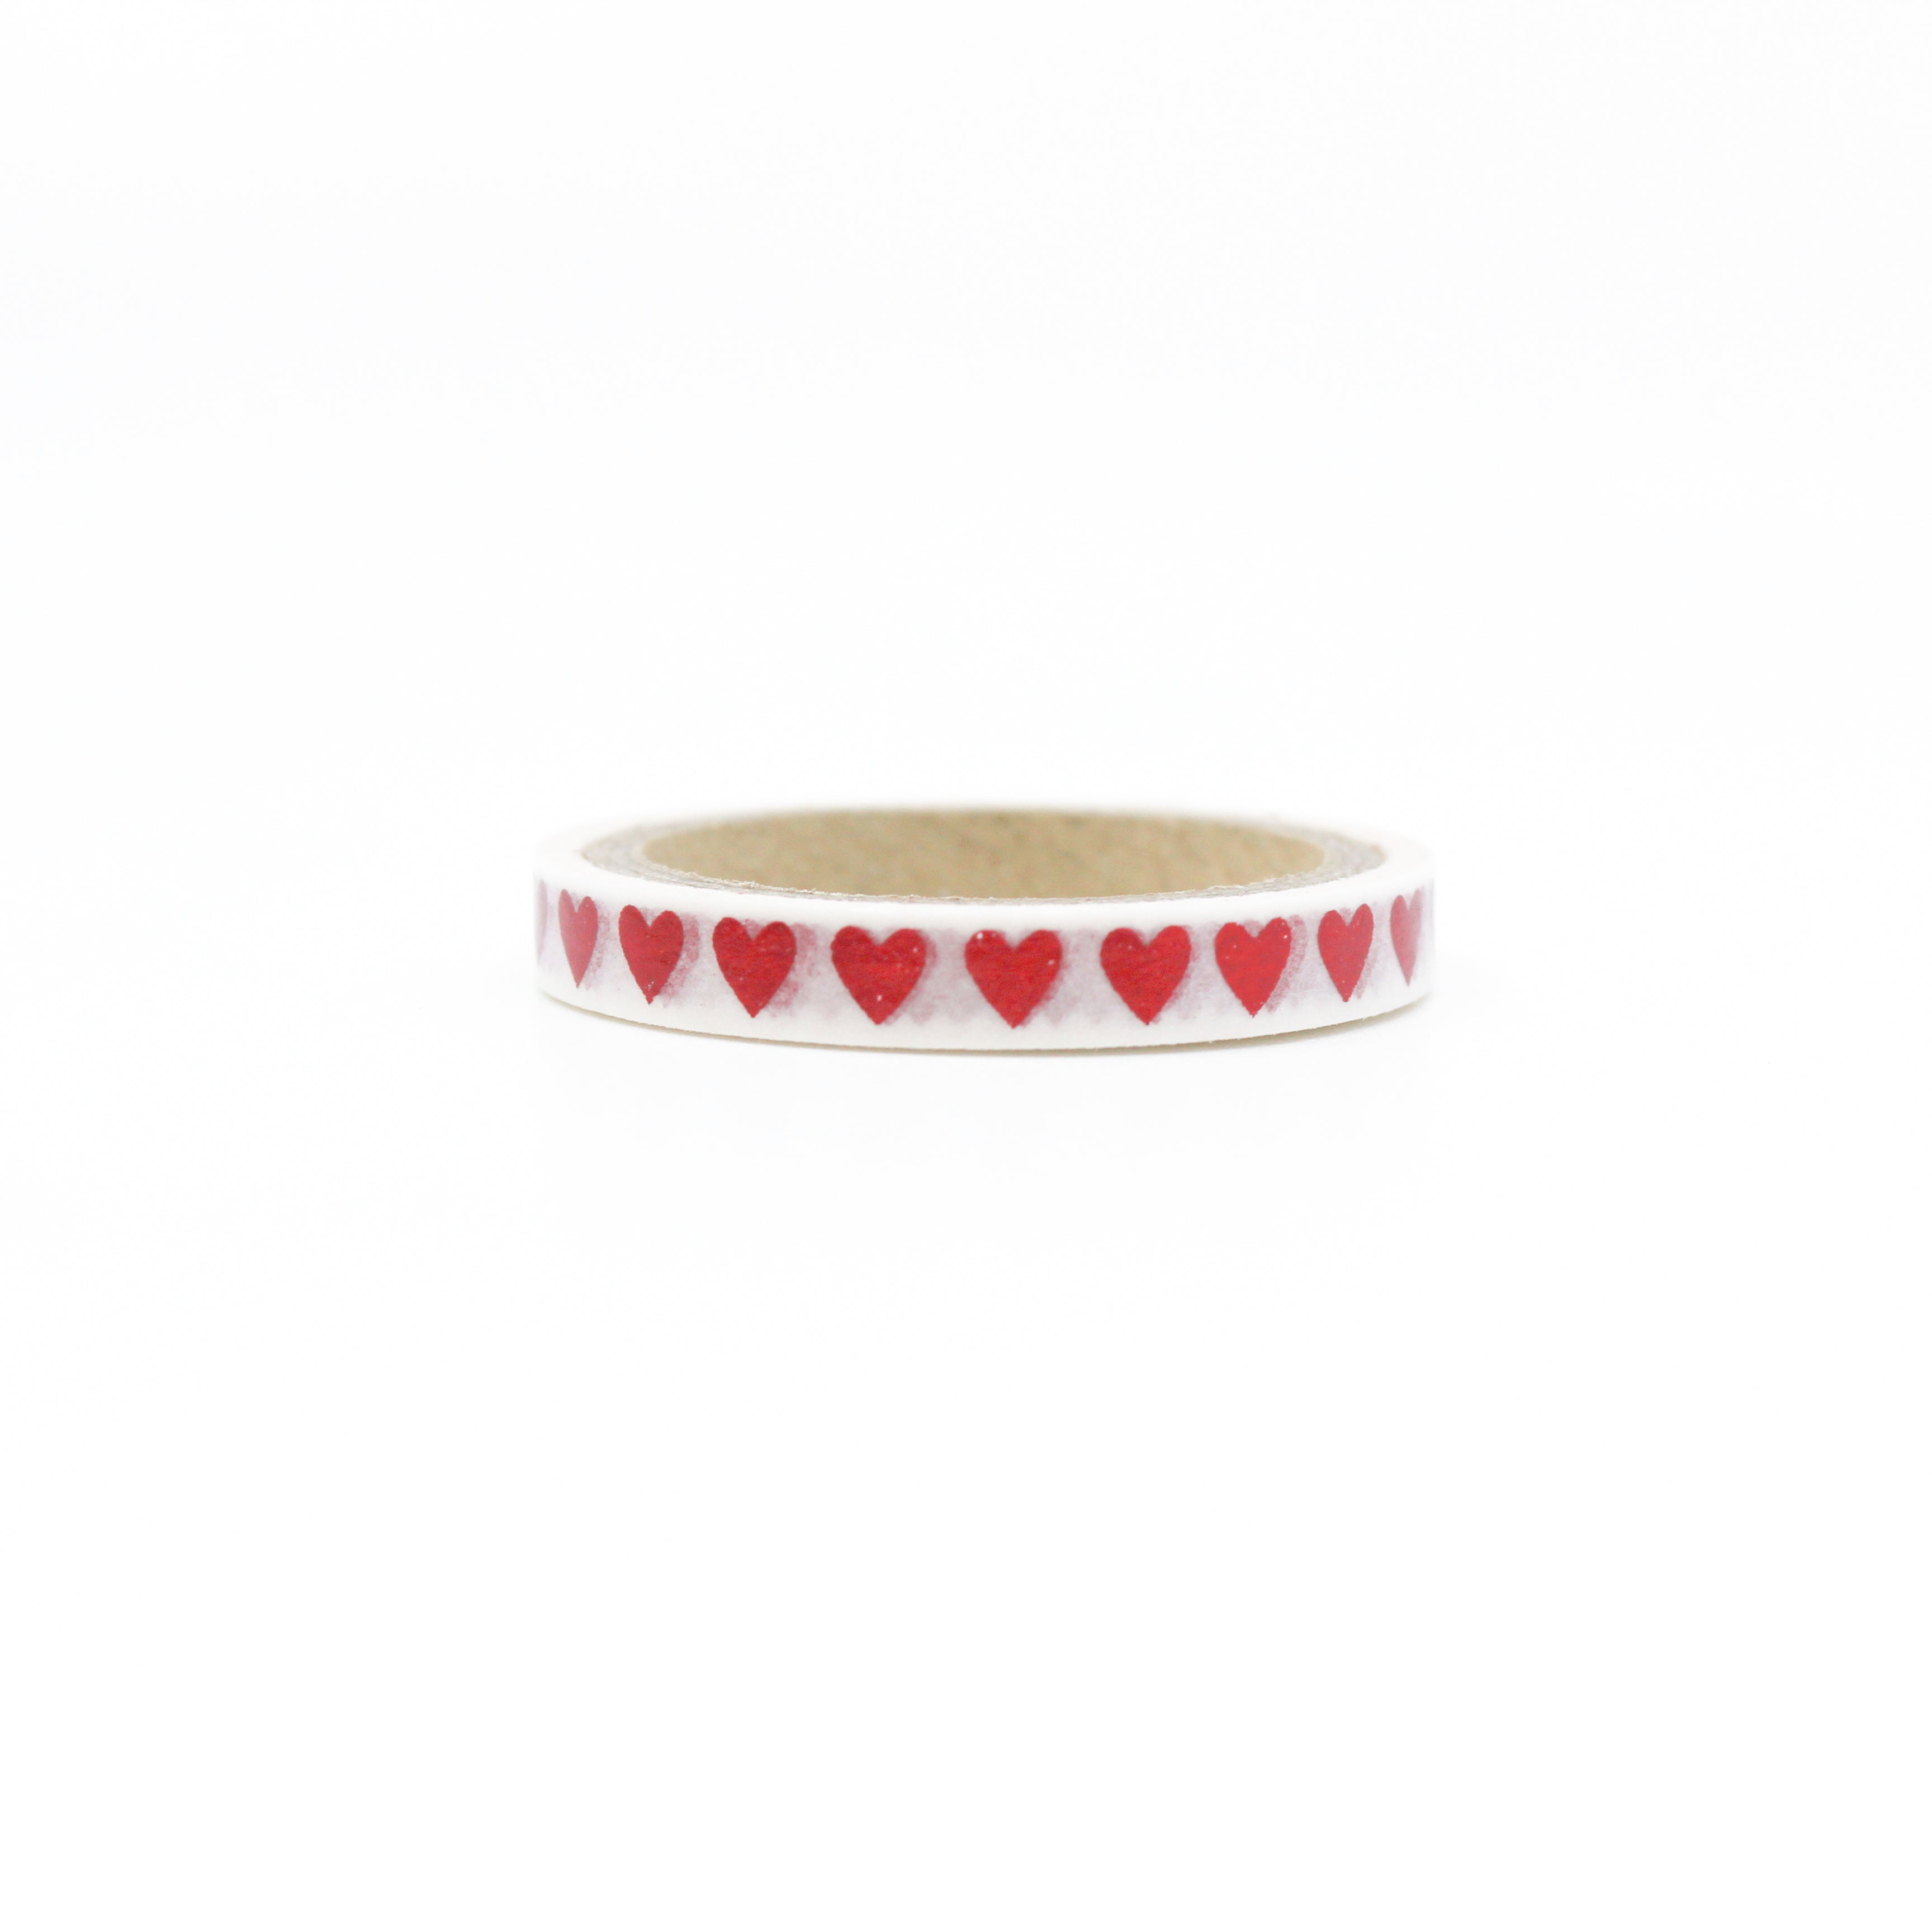 This is a cute red heart with white background view of washi tape from BBB Supplies Craft Shop